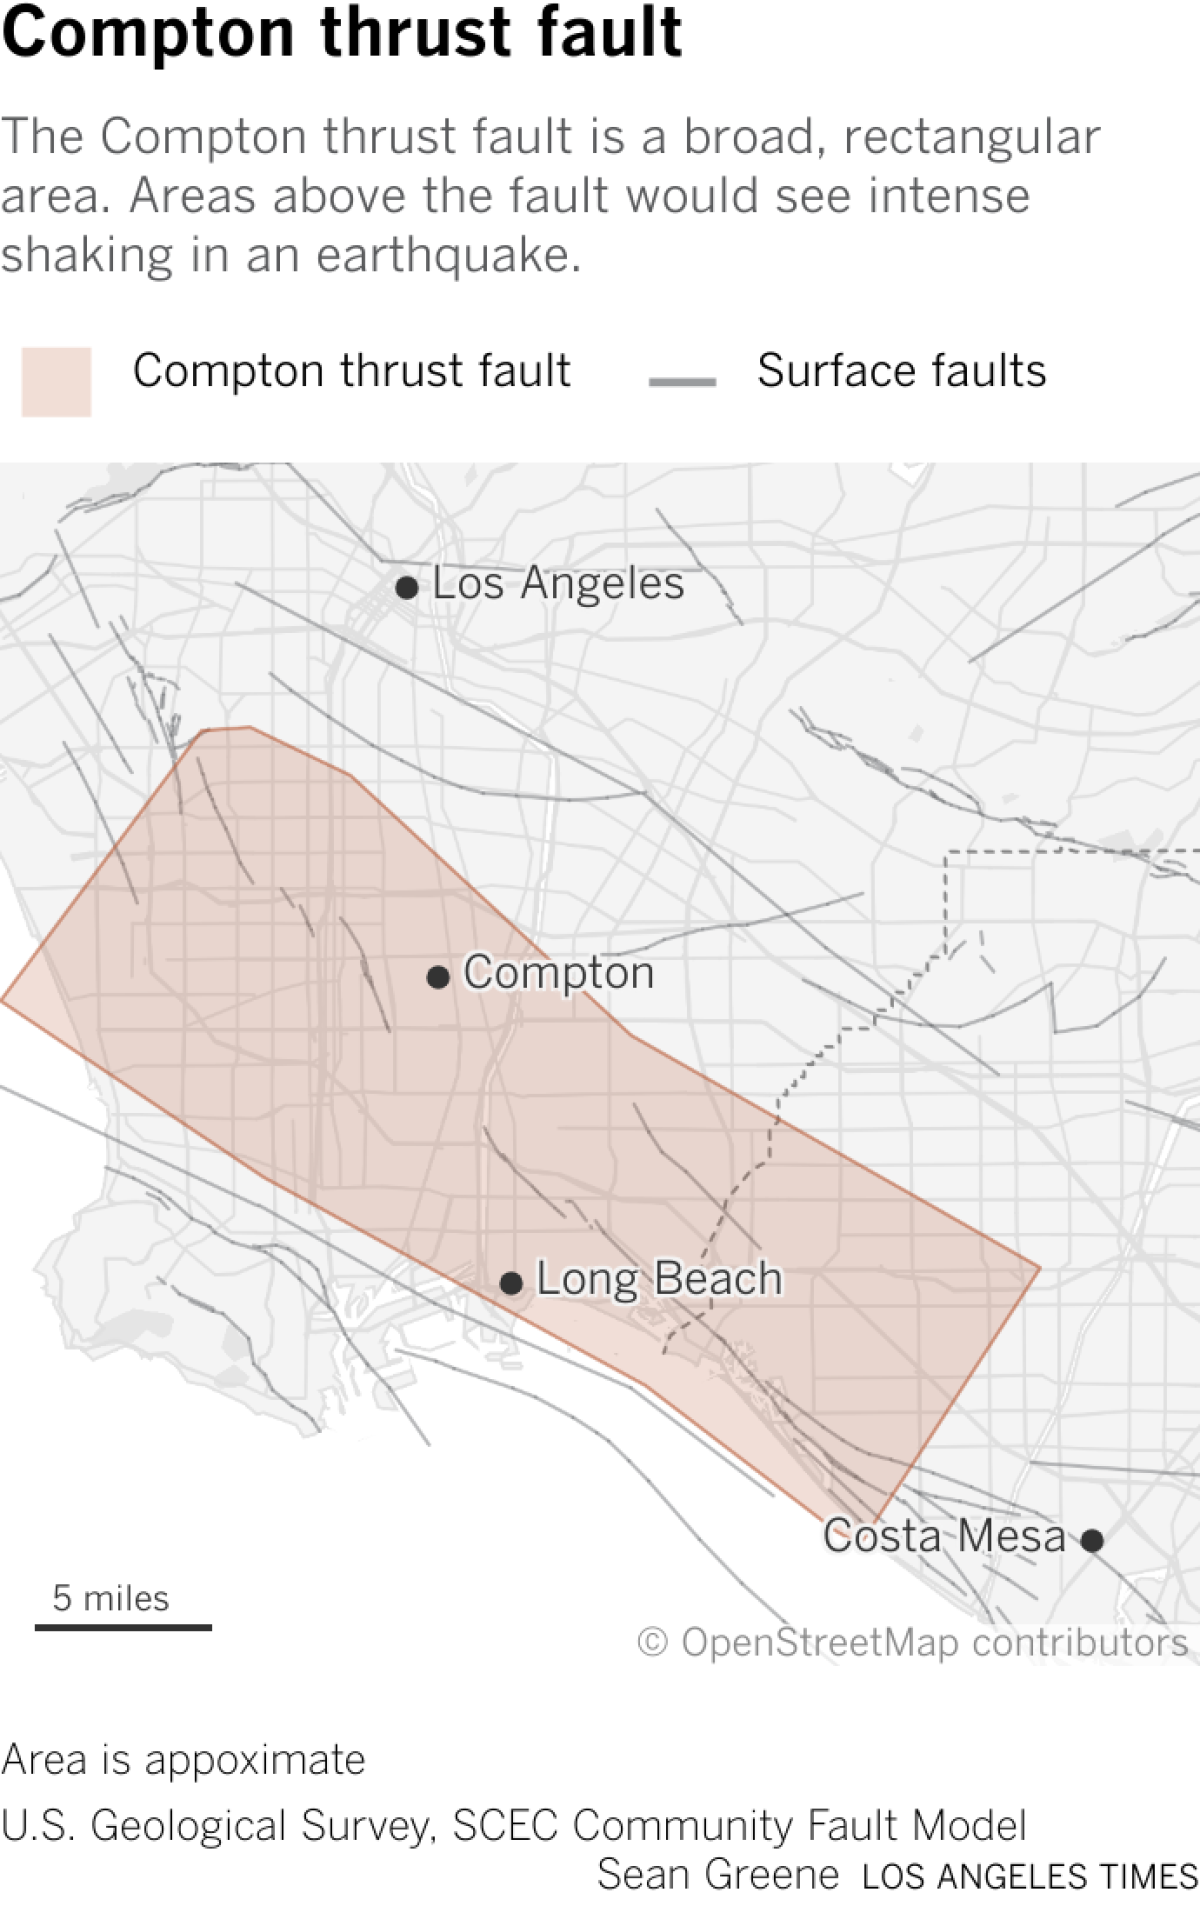 Map shows the appoximate location of the Compton thrust fault, an area covering much of Los Angeles and parts of Orange counties